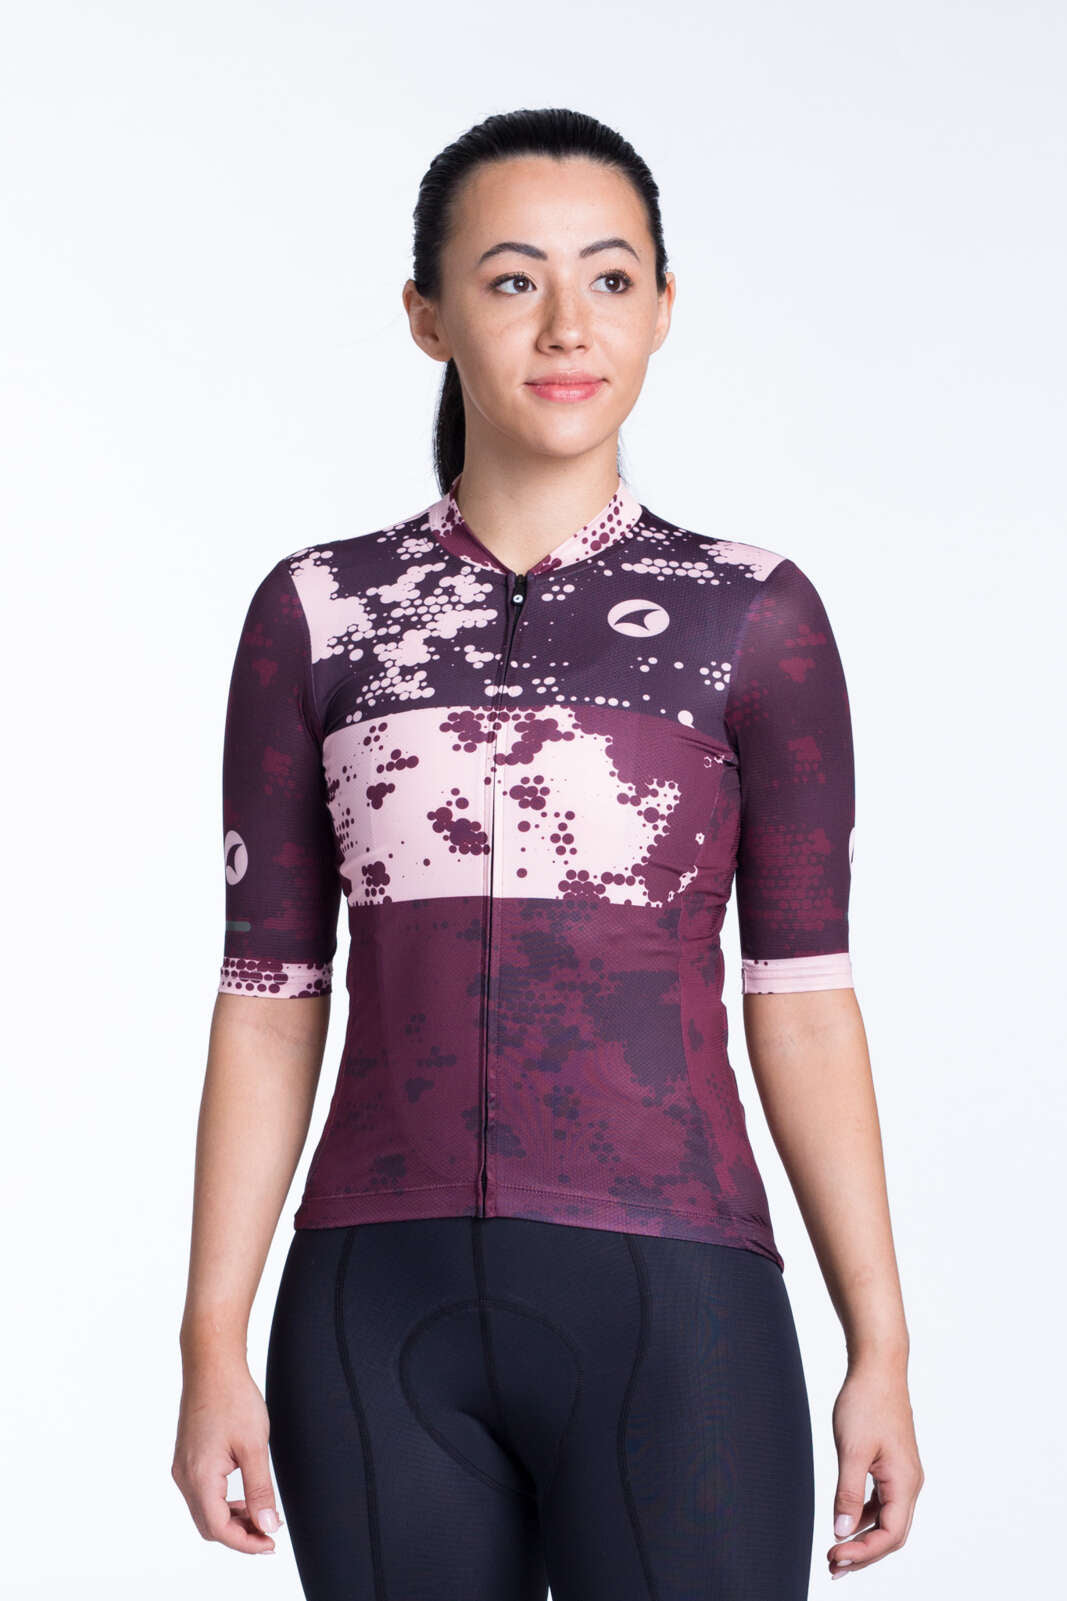 Women's Burgundy Summer Cycling Jersey - Ascent Aero Disperse Front View